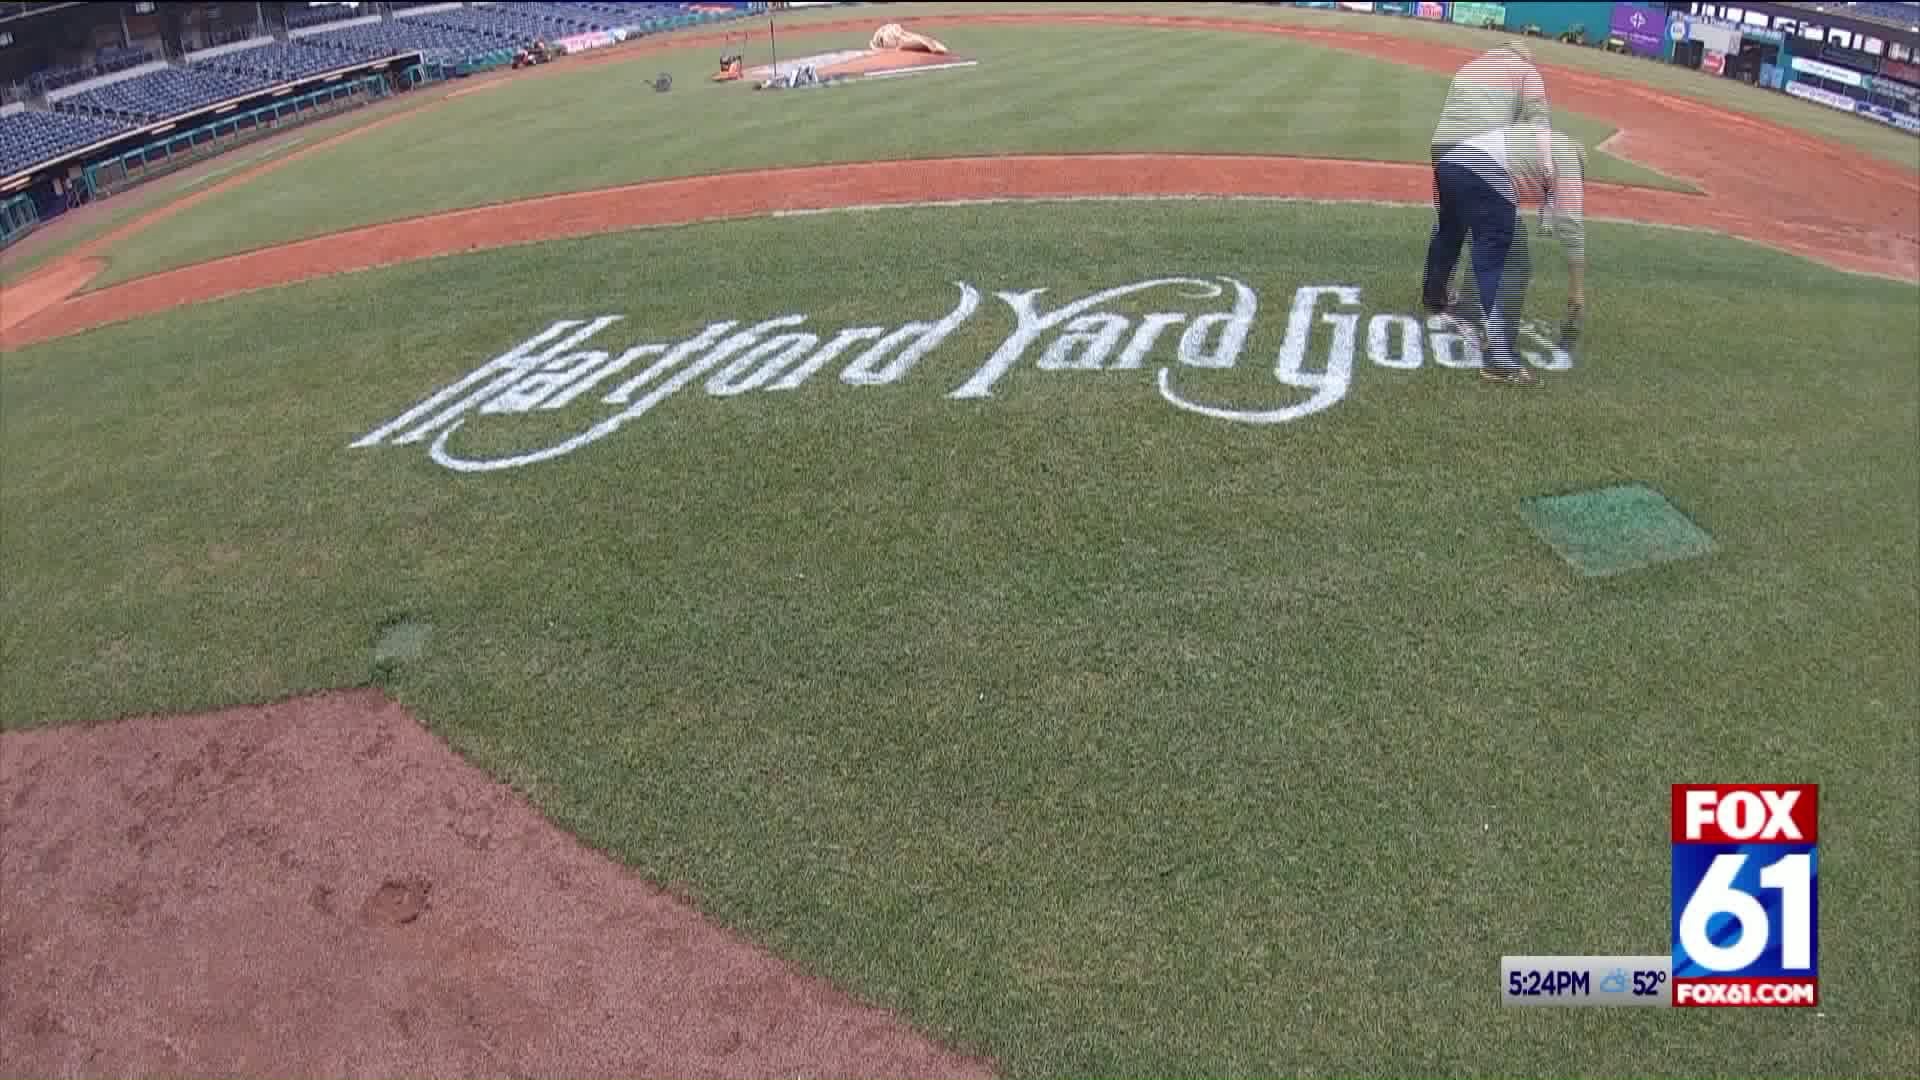 Getting the field ready for the Yard Goats